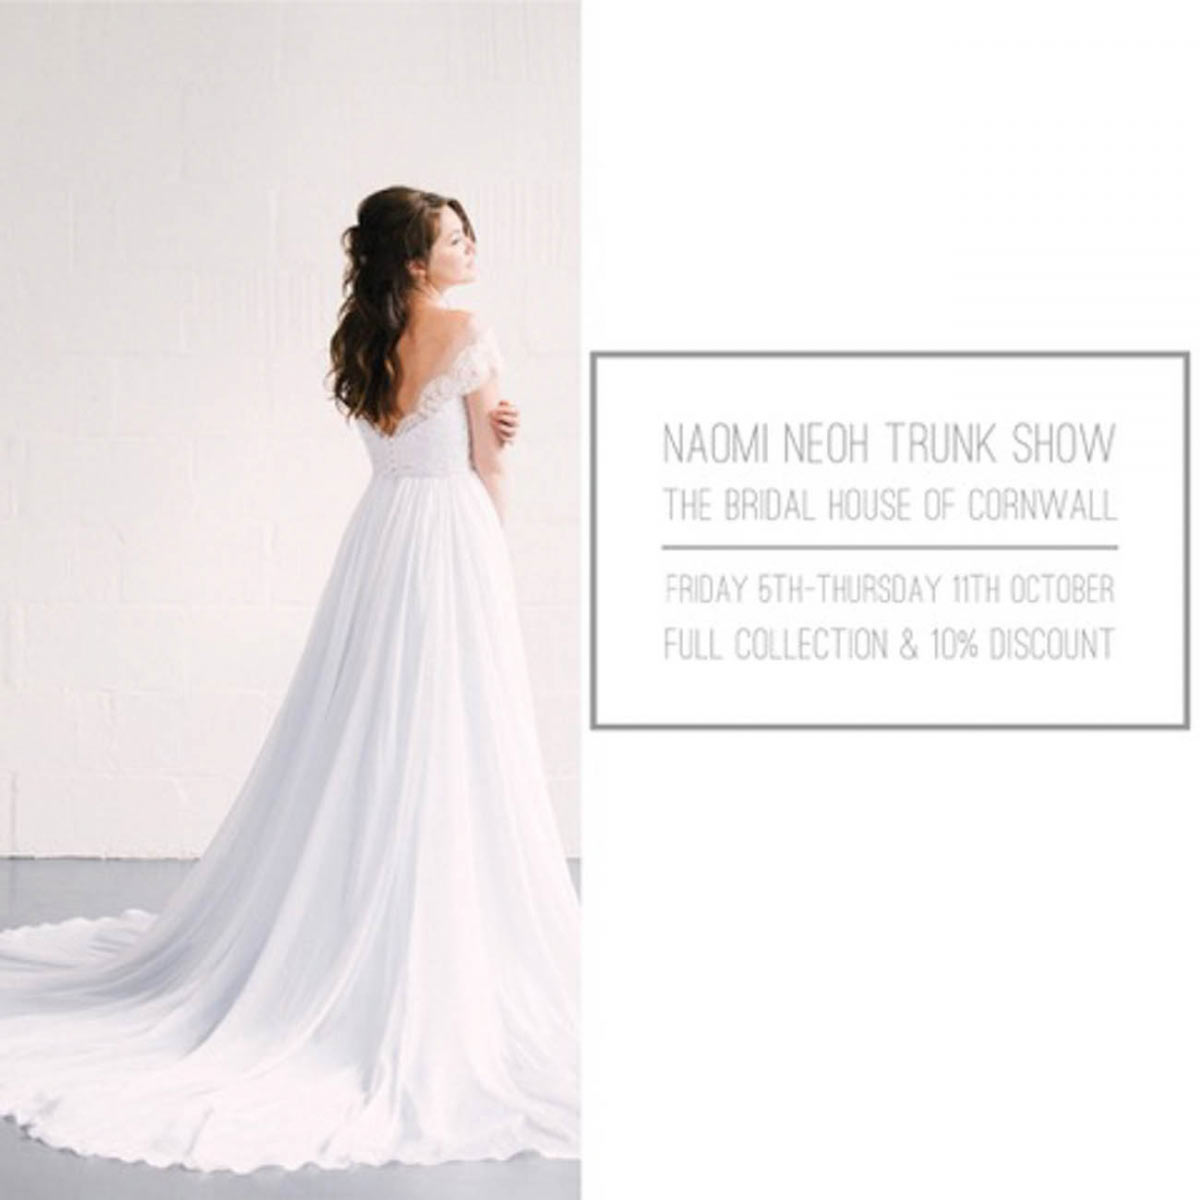 Naomi Neoh trunk show at The Bridal House of Cornwall